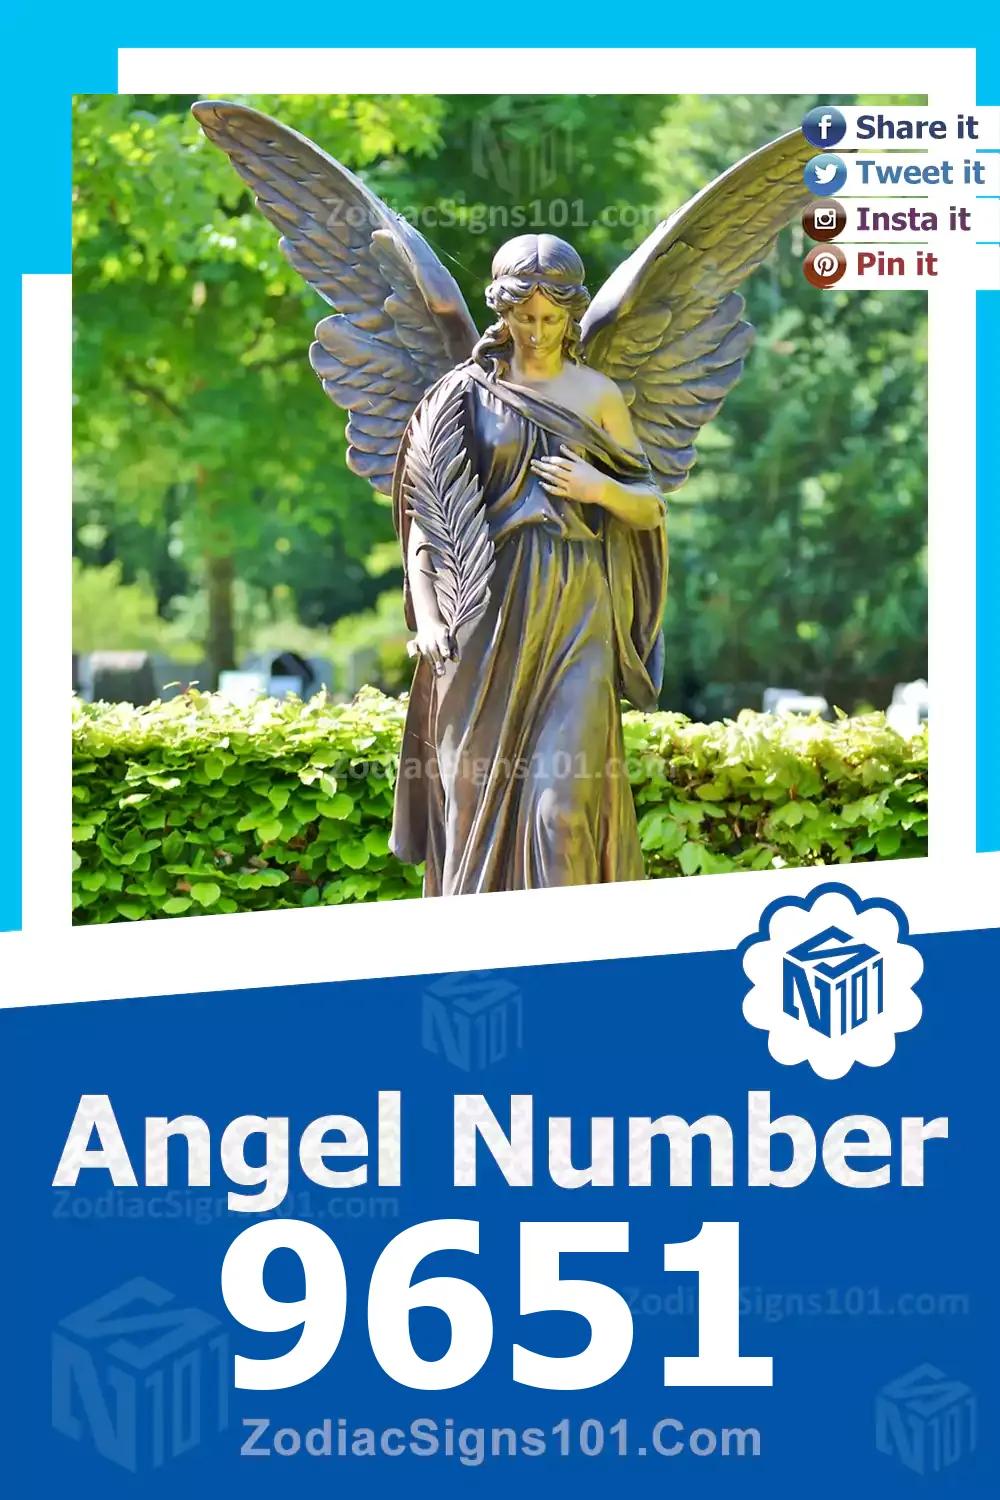 9651 Angel Number Meaning